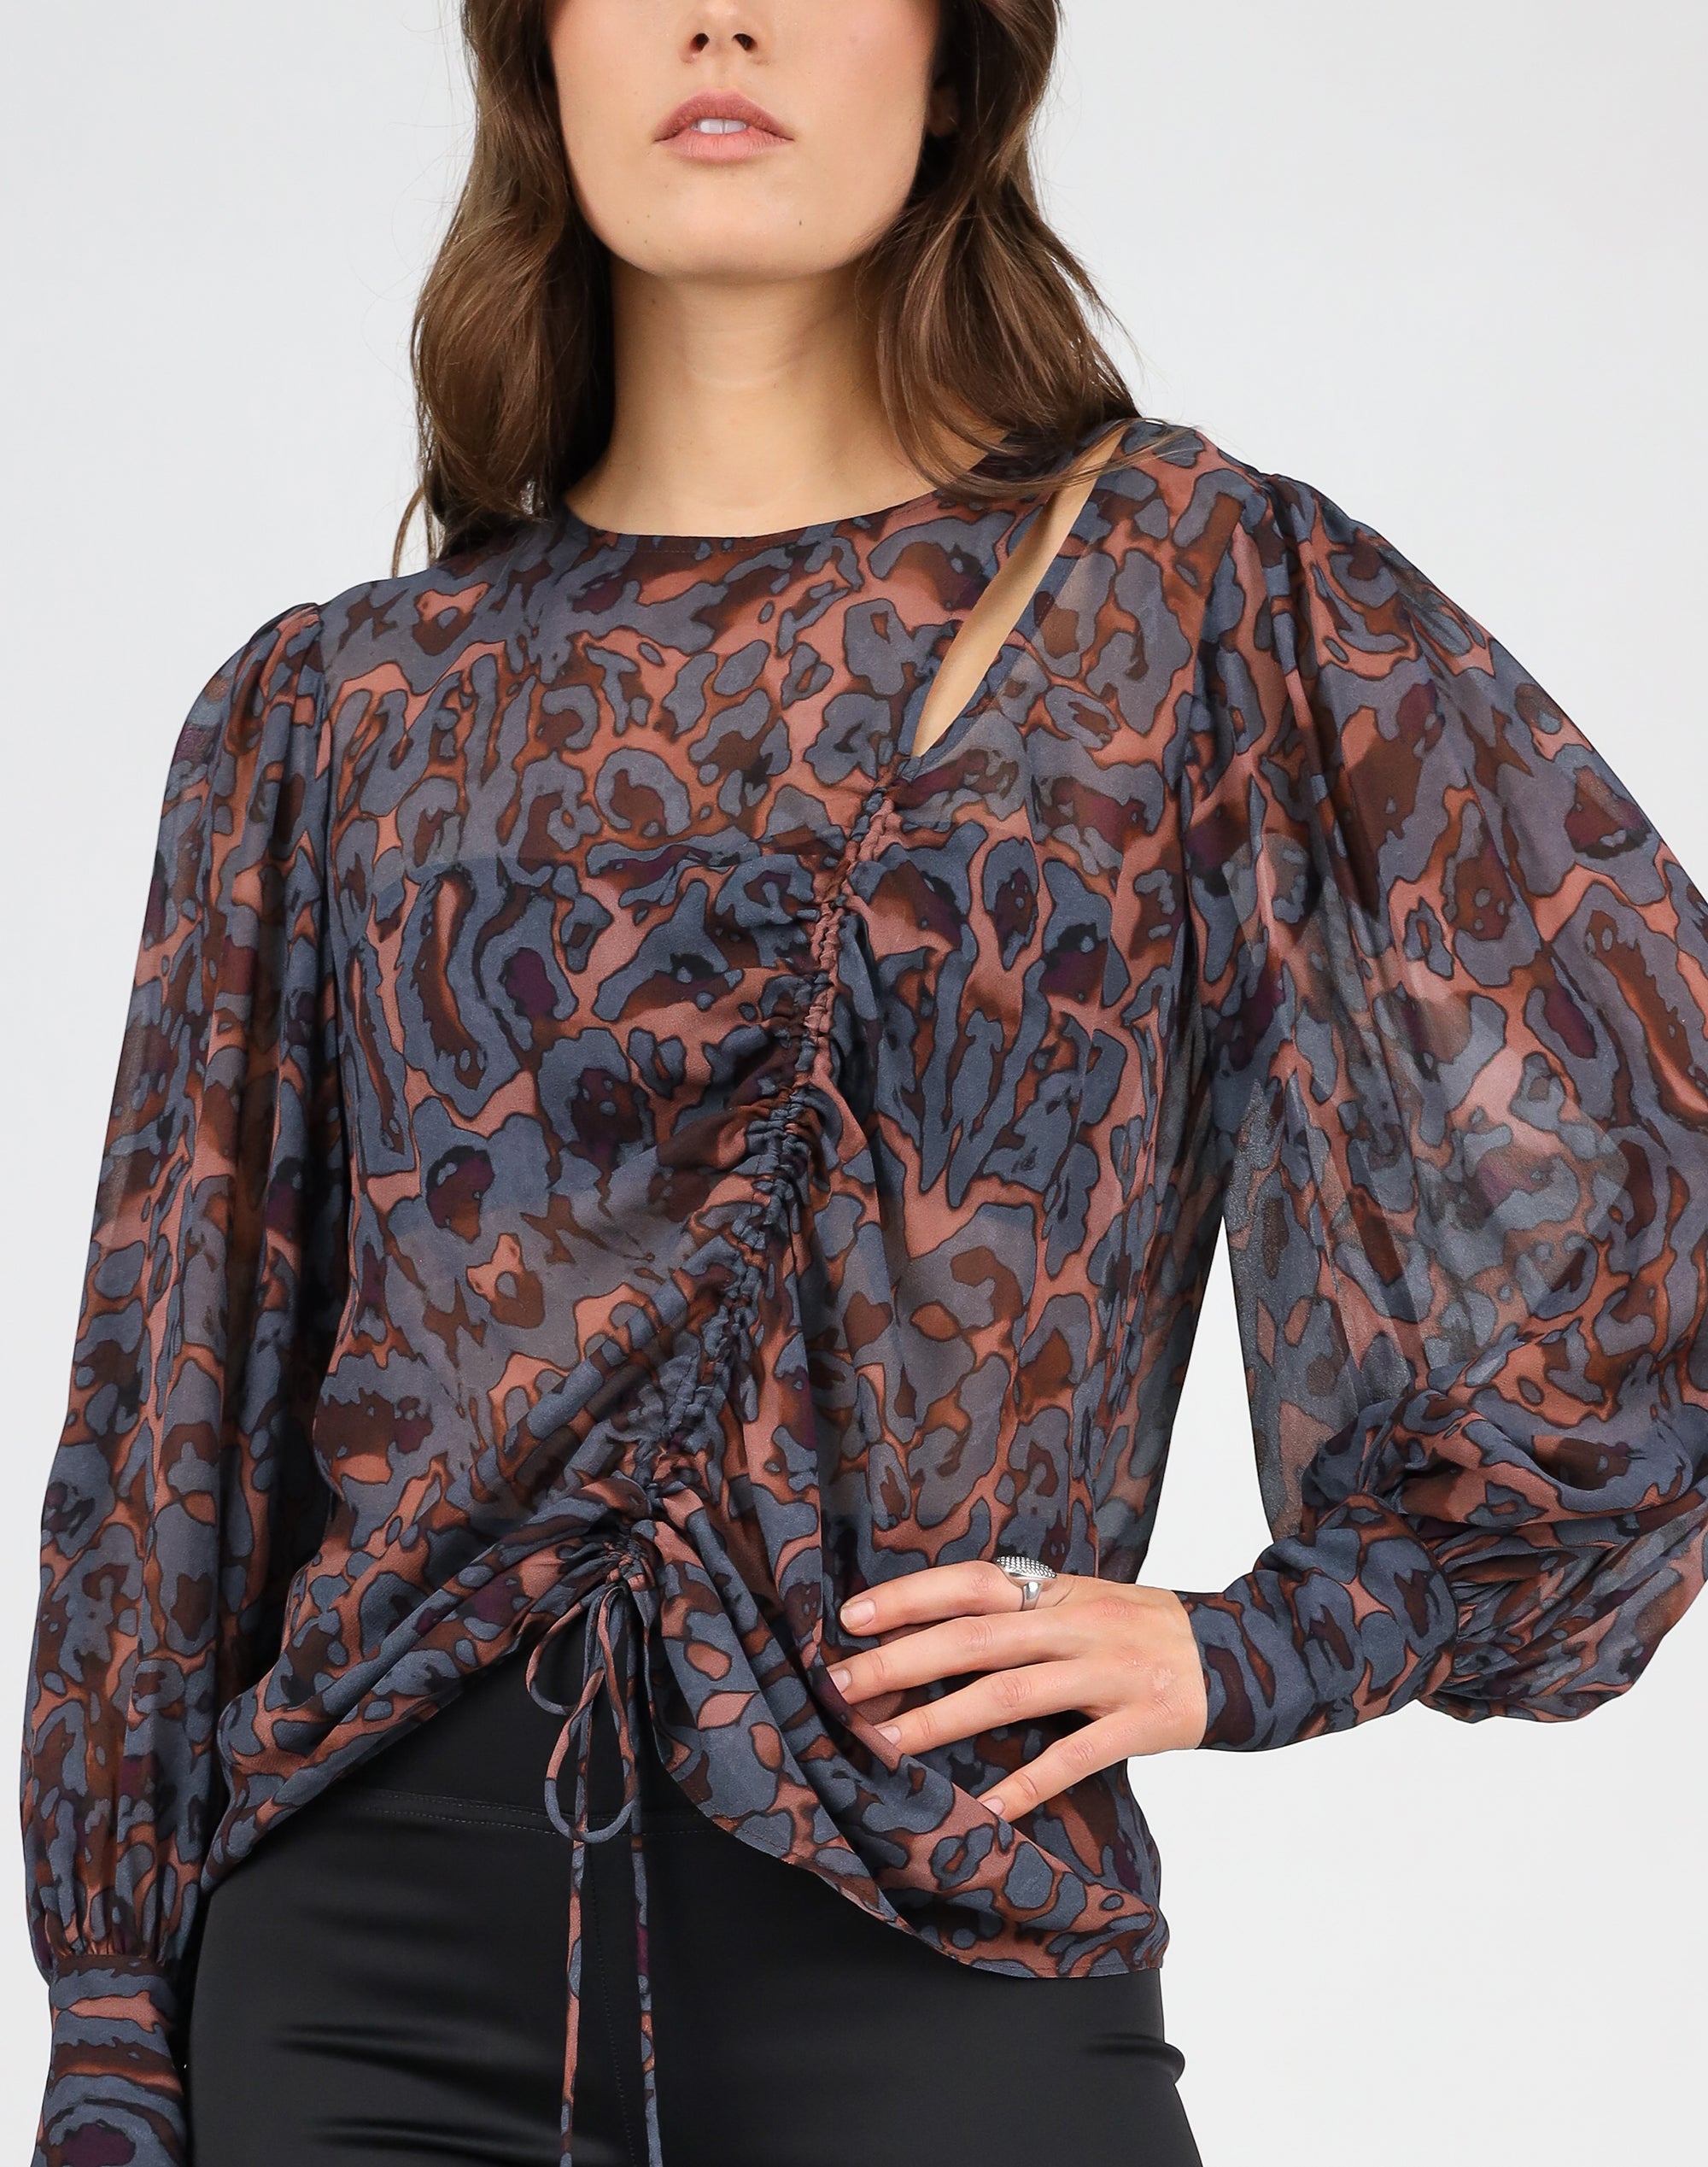 Hunted Print Cut Out Top